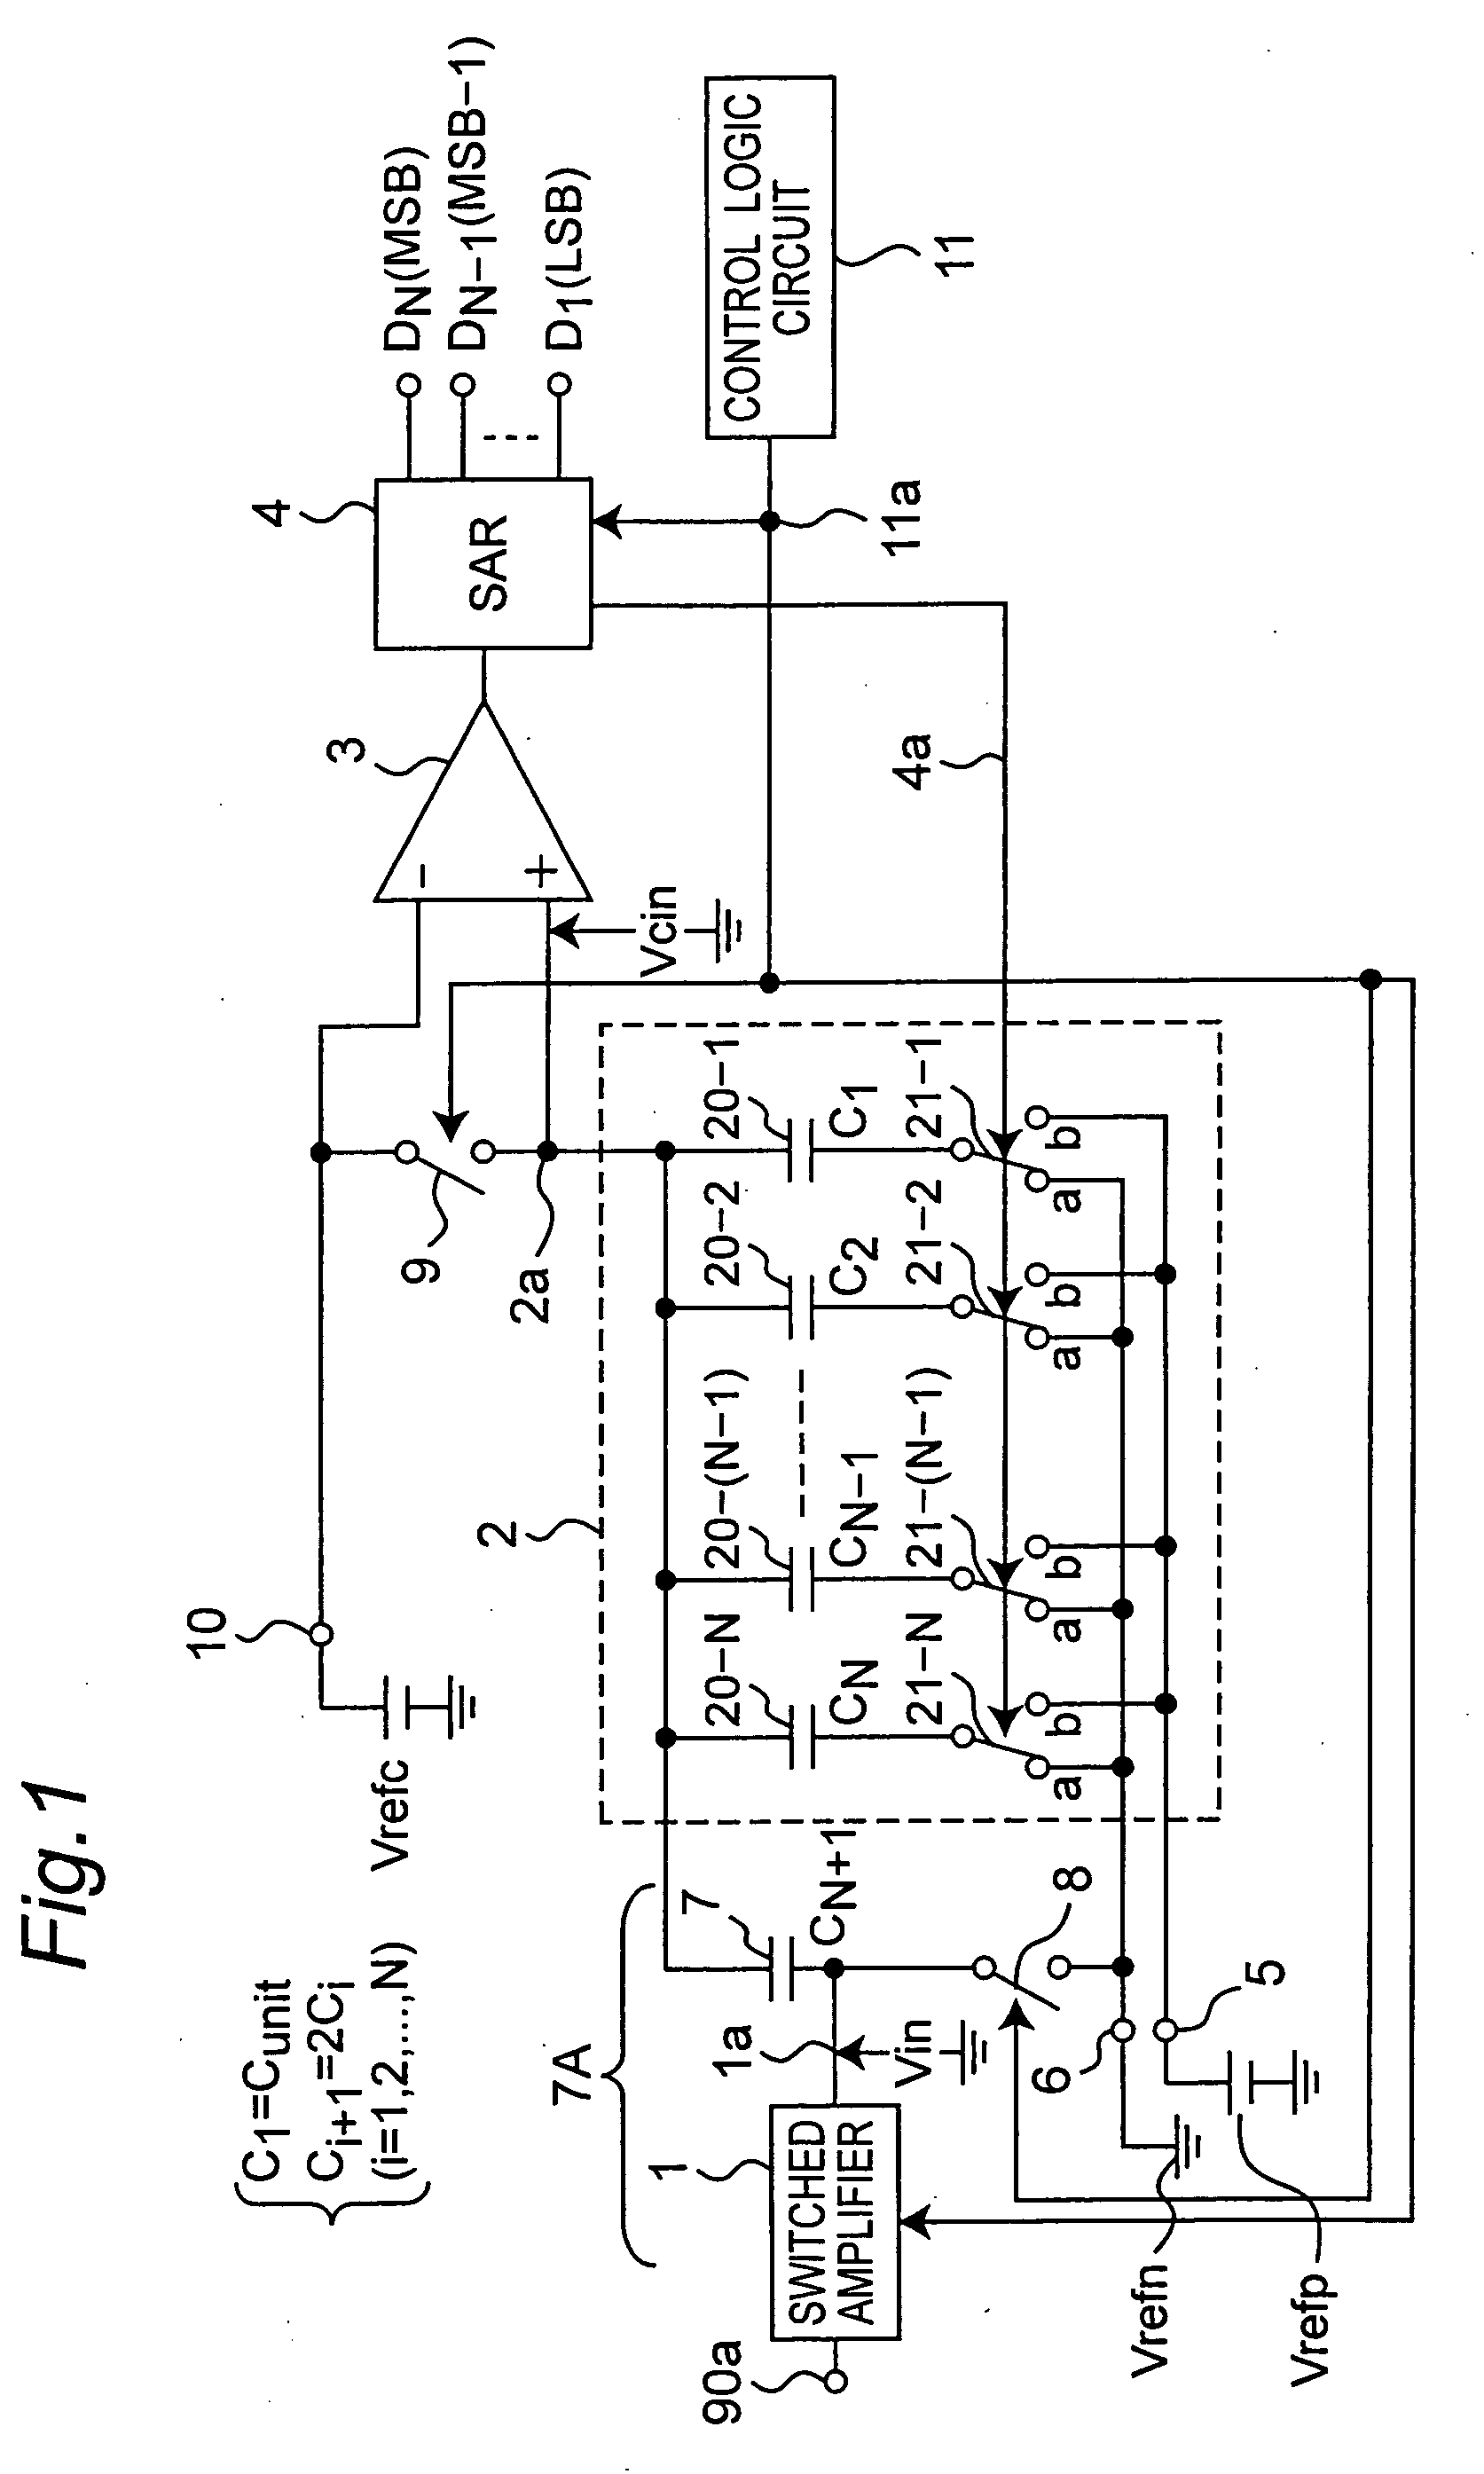 Analog to digital converter circuit of successive approximation type operating at low voltage